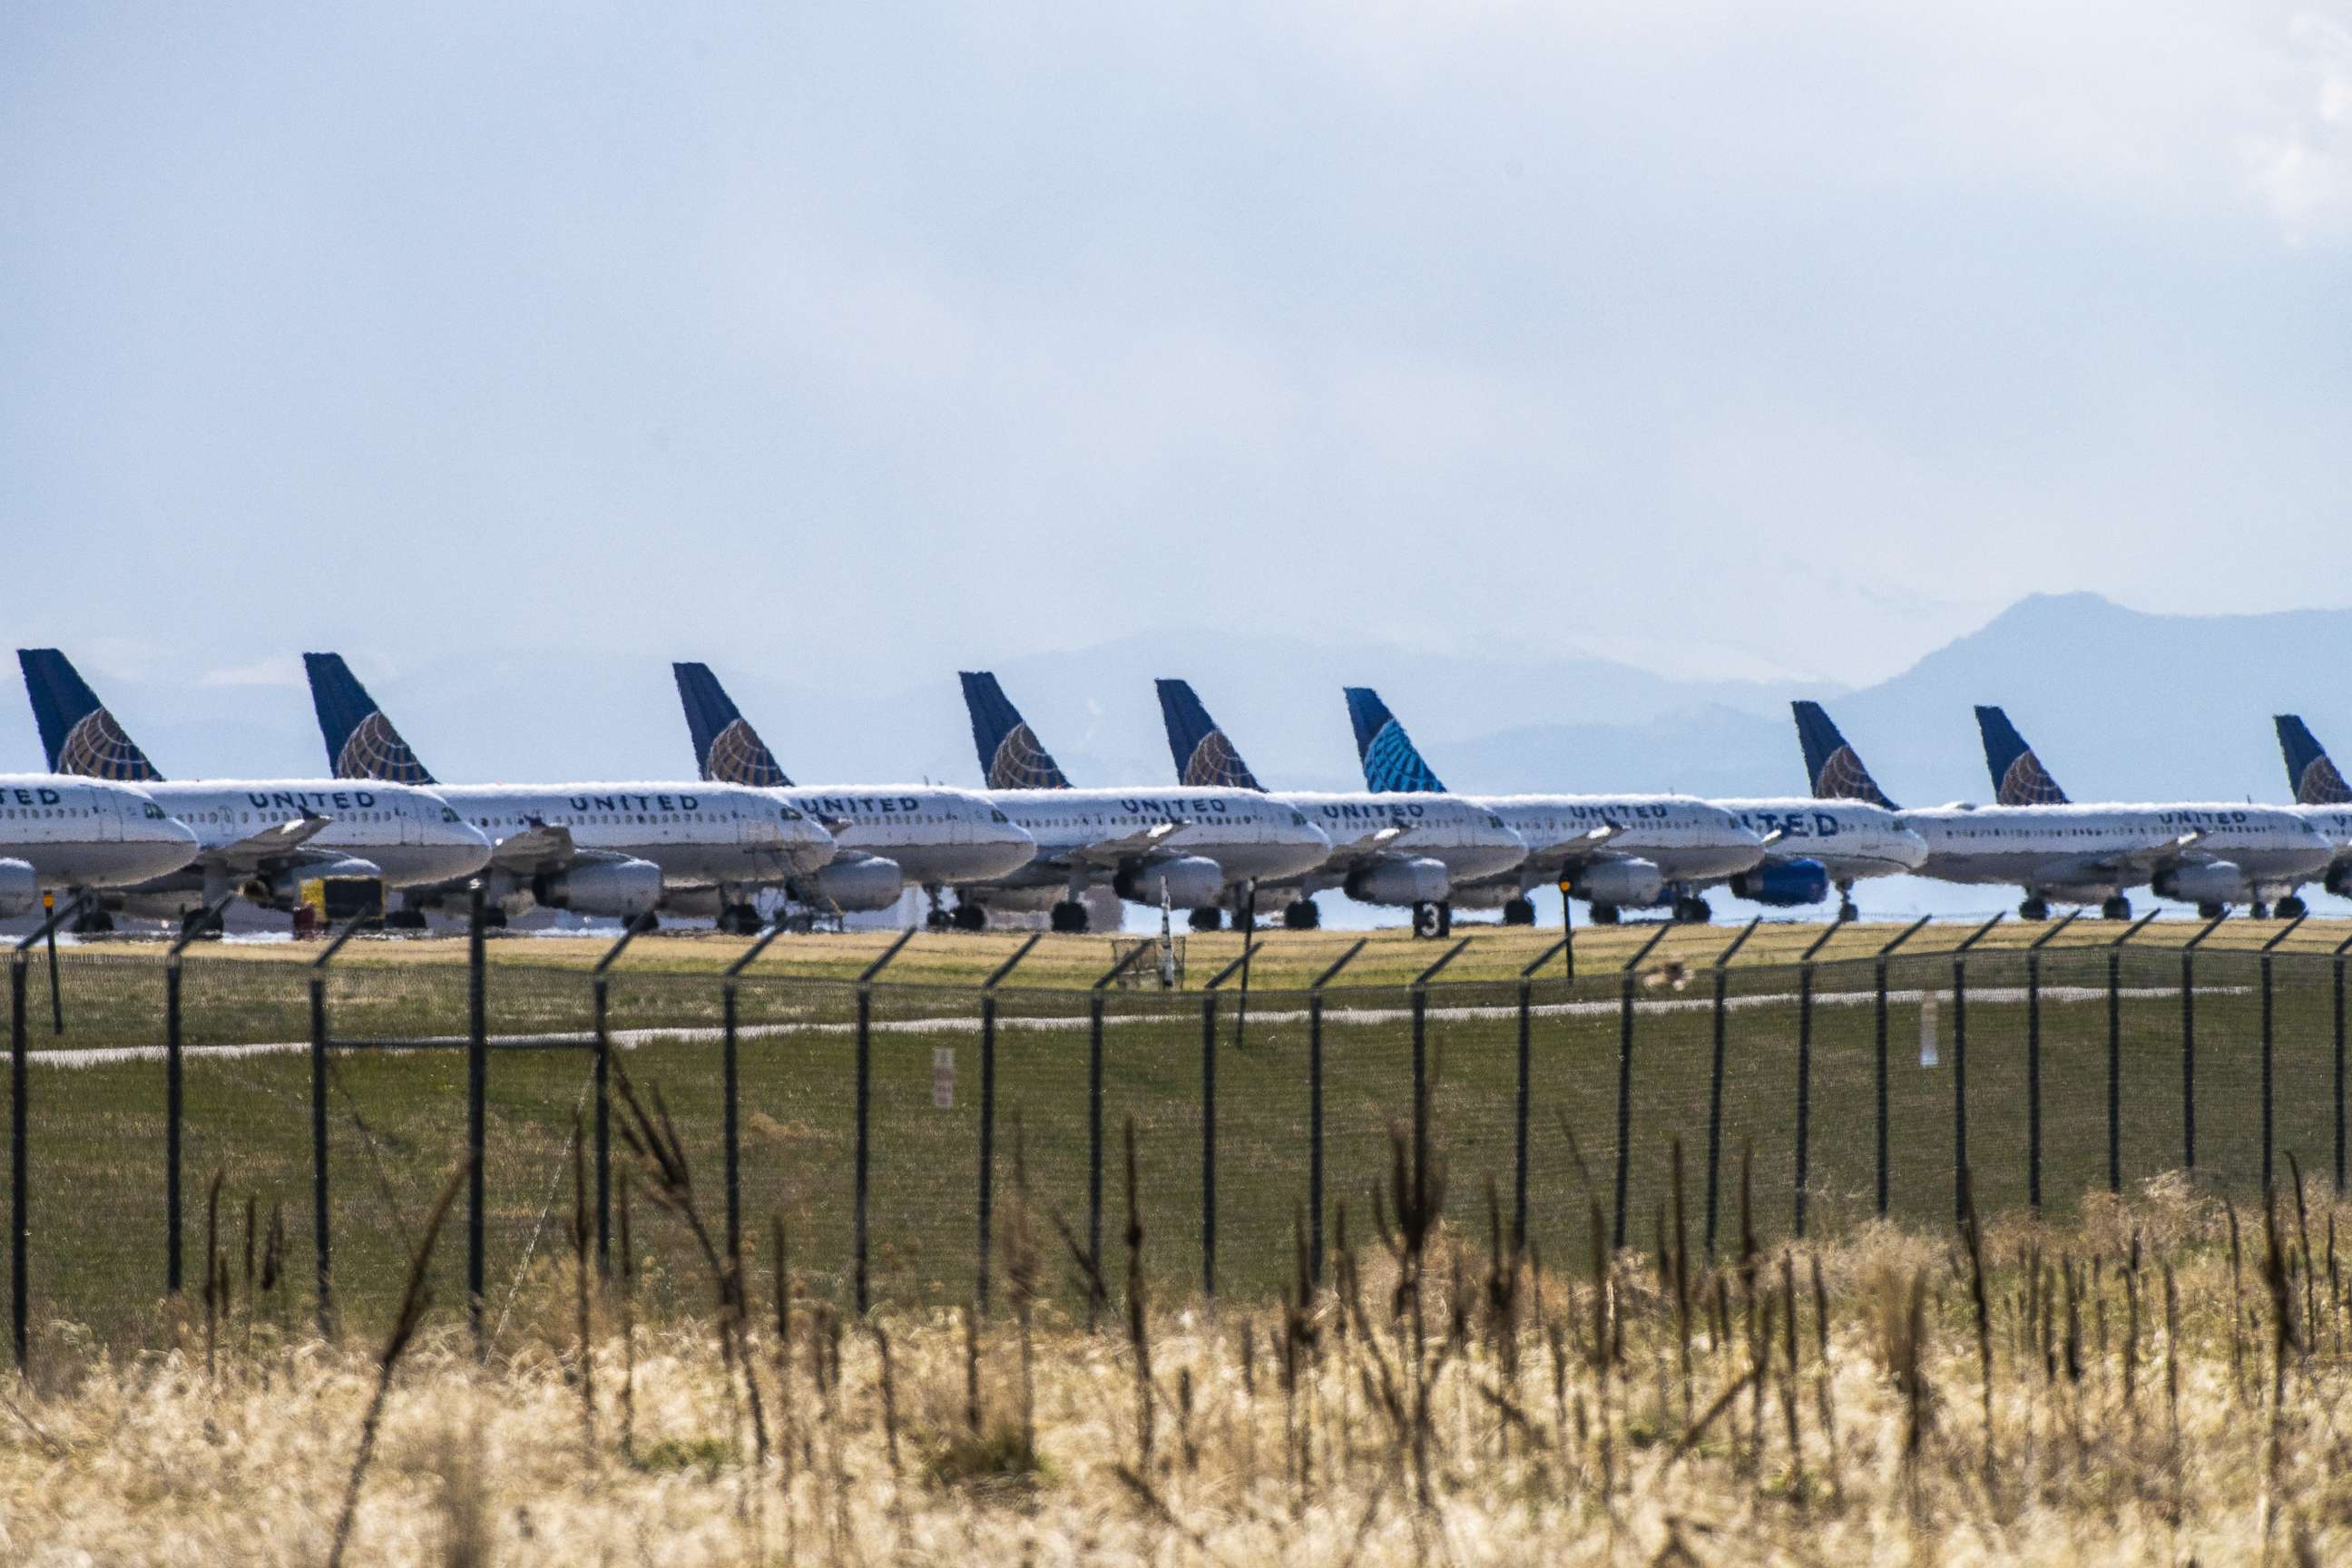 PHOTO: DENVER, CO - APRIL 22: United Airlines planes sit parked on a runway at Denver International Airport as the coronavirus pandemic slows air travel on April 22, 2020 in Denver, Colorado. 